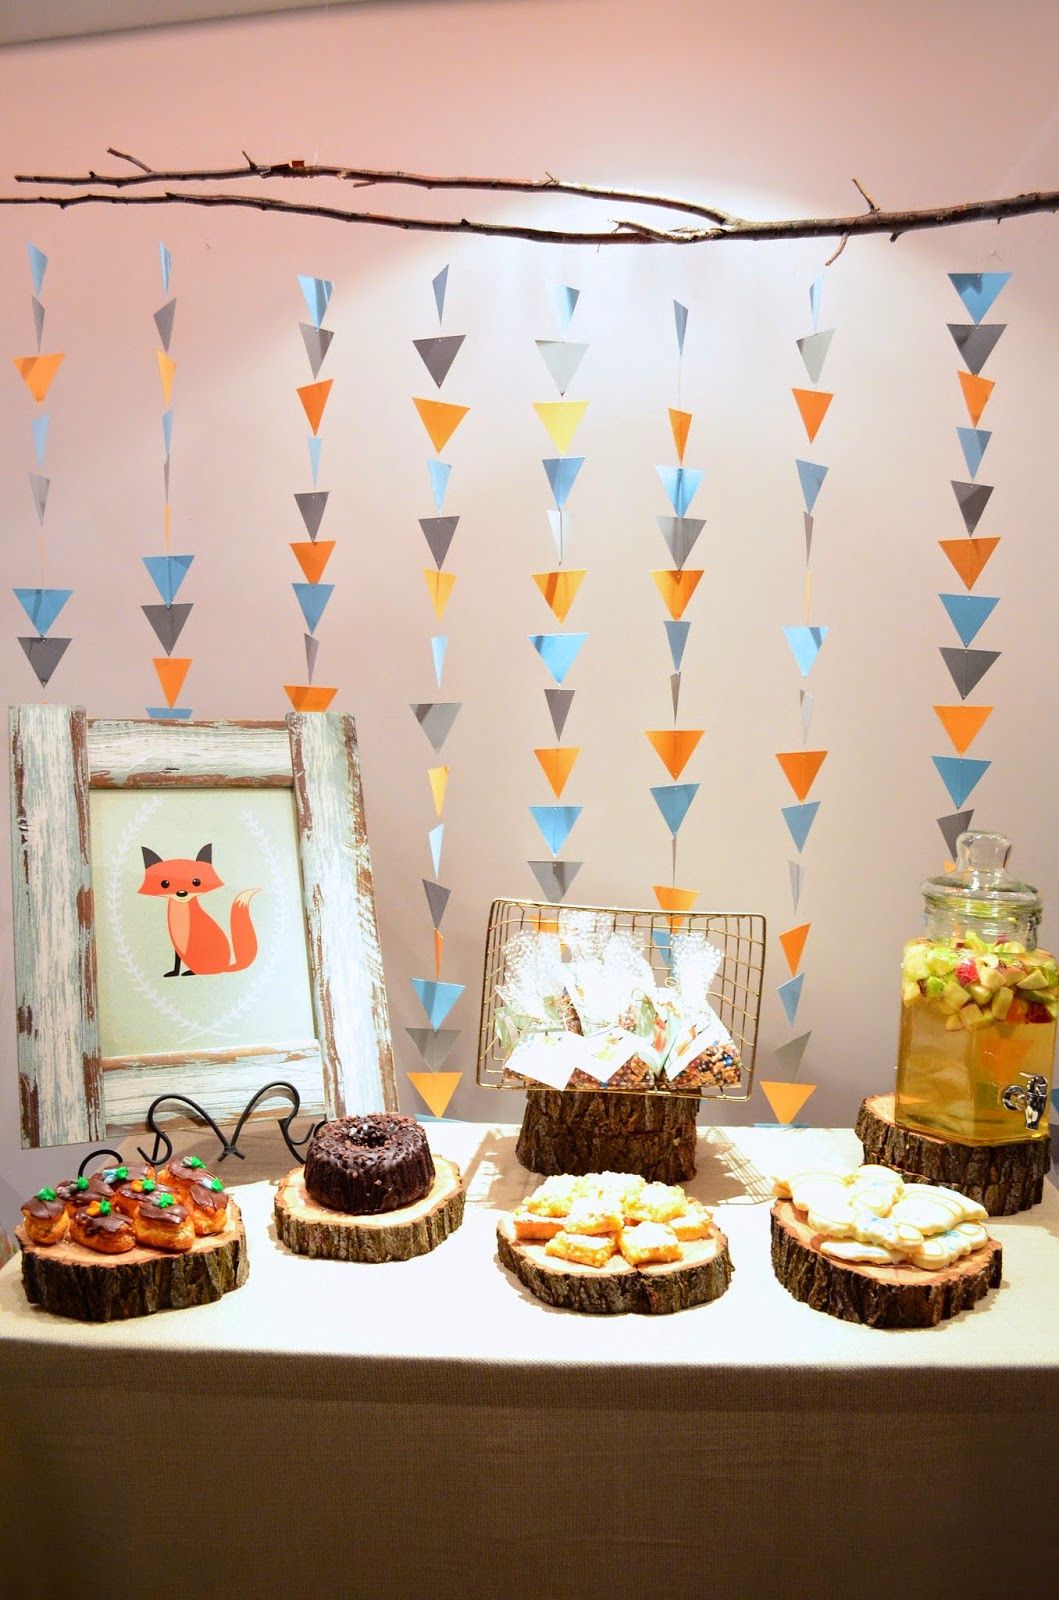 Decoration Ideas For Baby Shower
 Adorn Event Styling Fox Themed Baby Shower